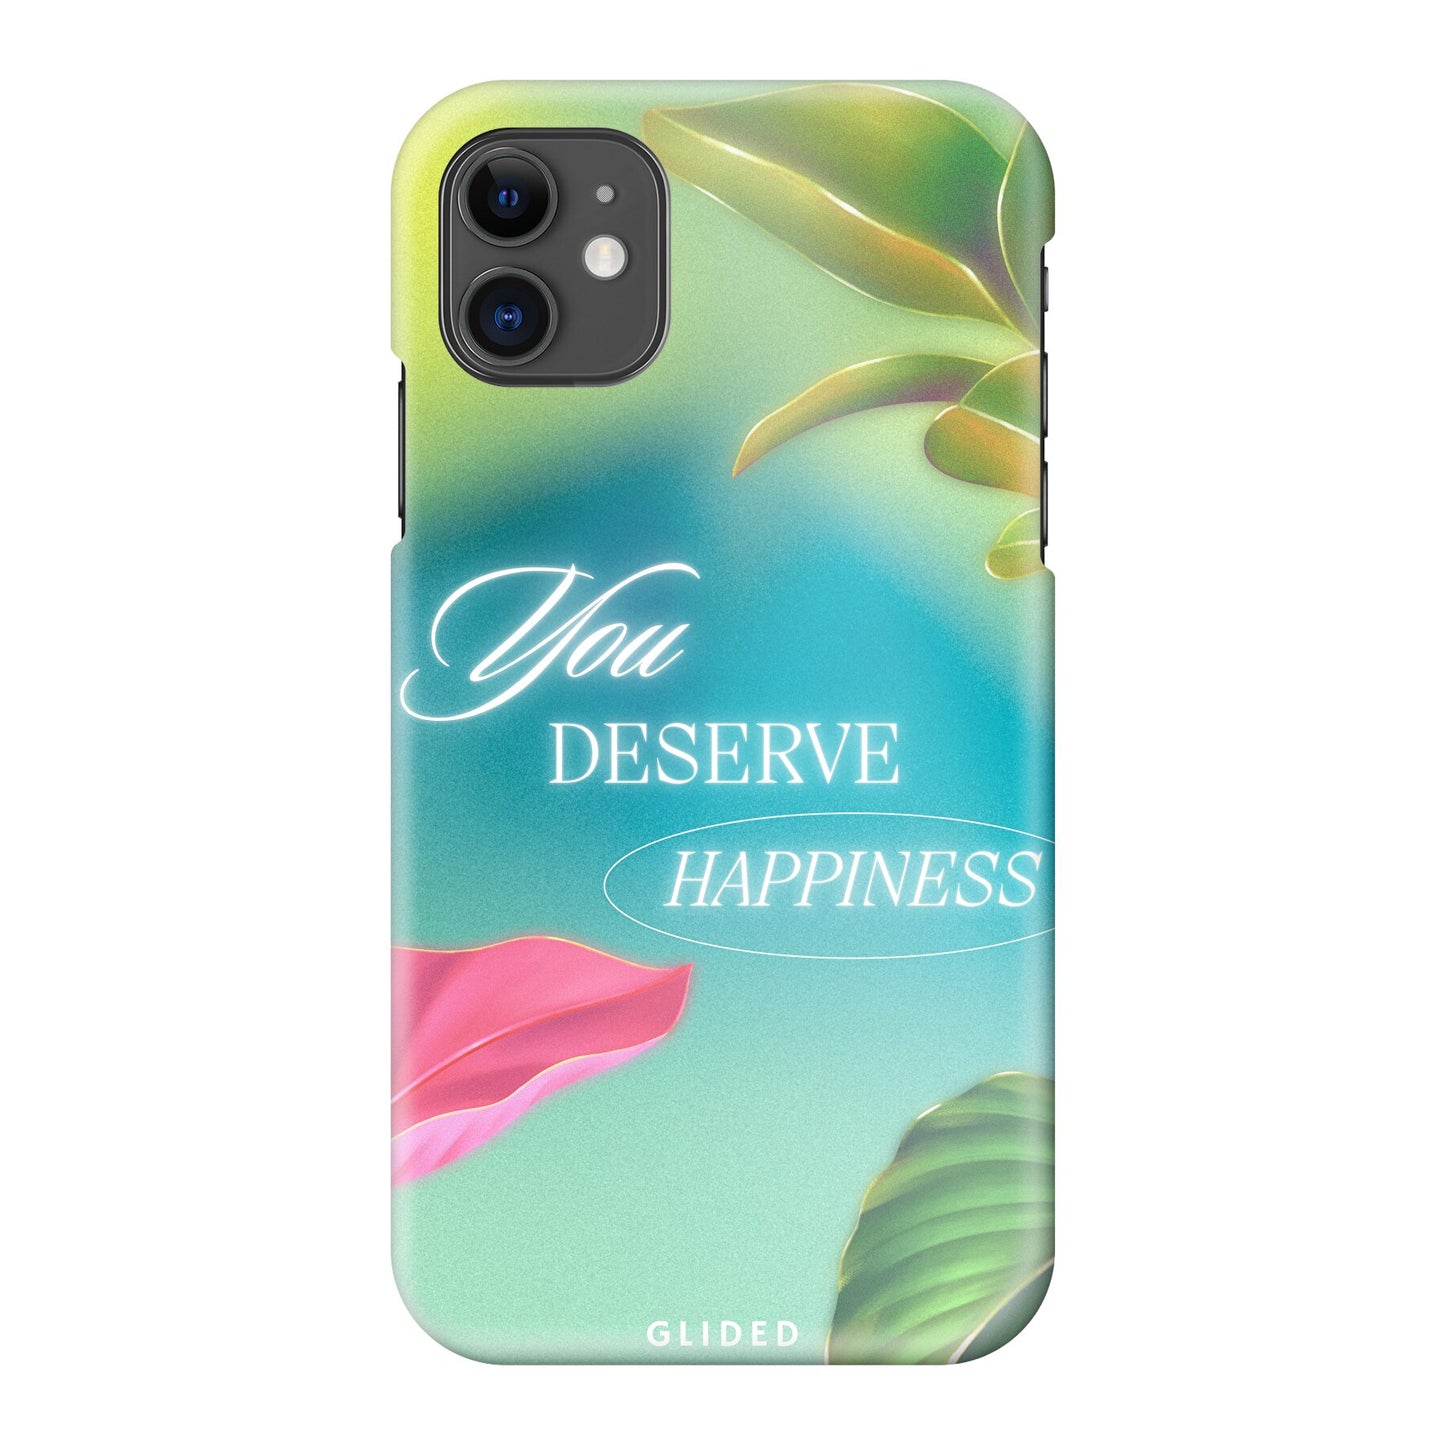 Happiness - iPhone 11 - Hard Case